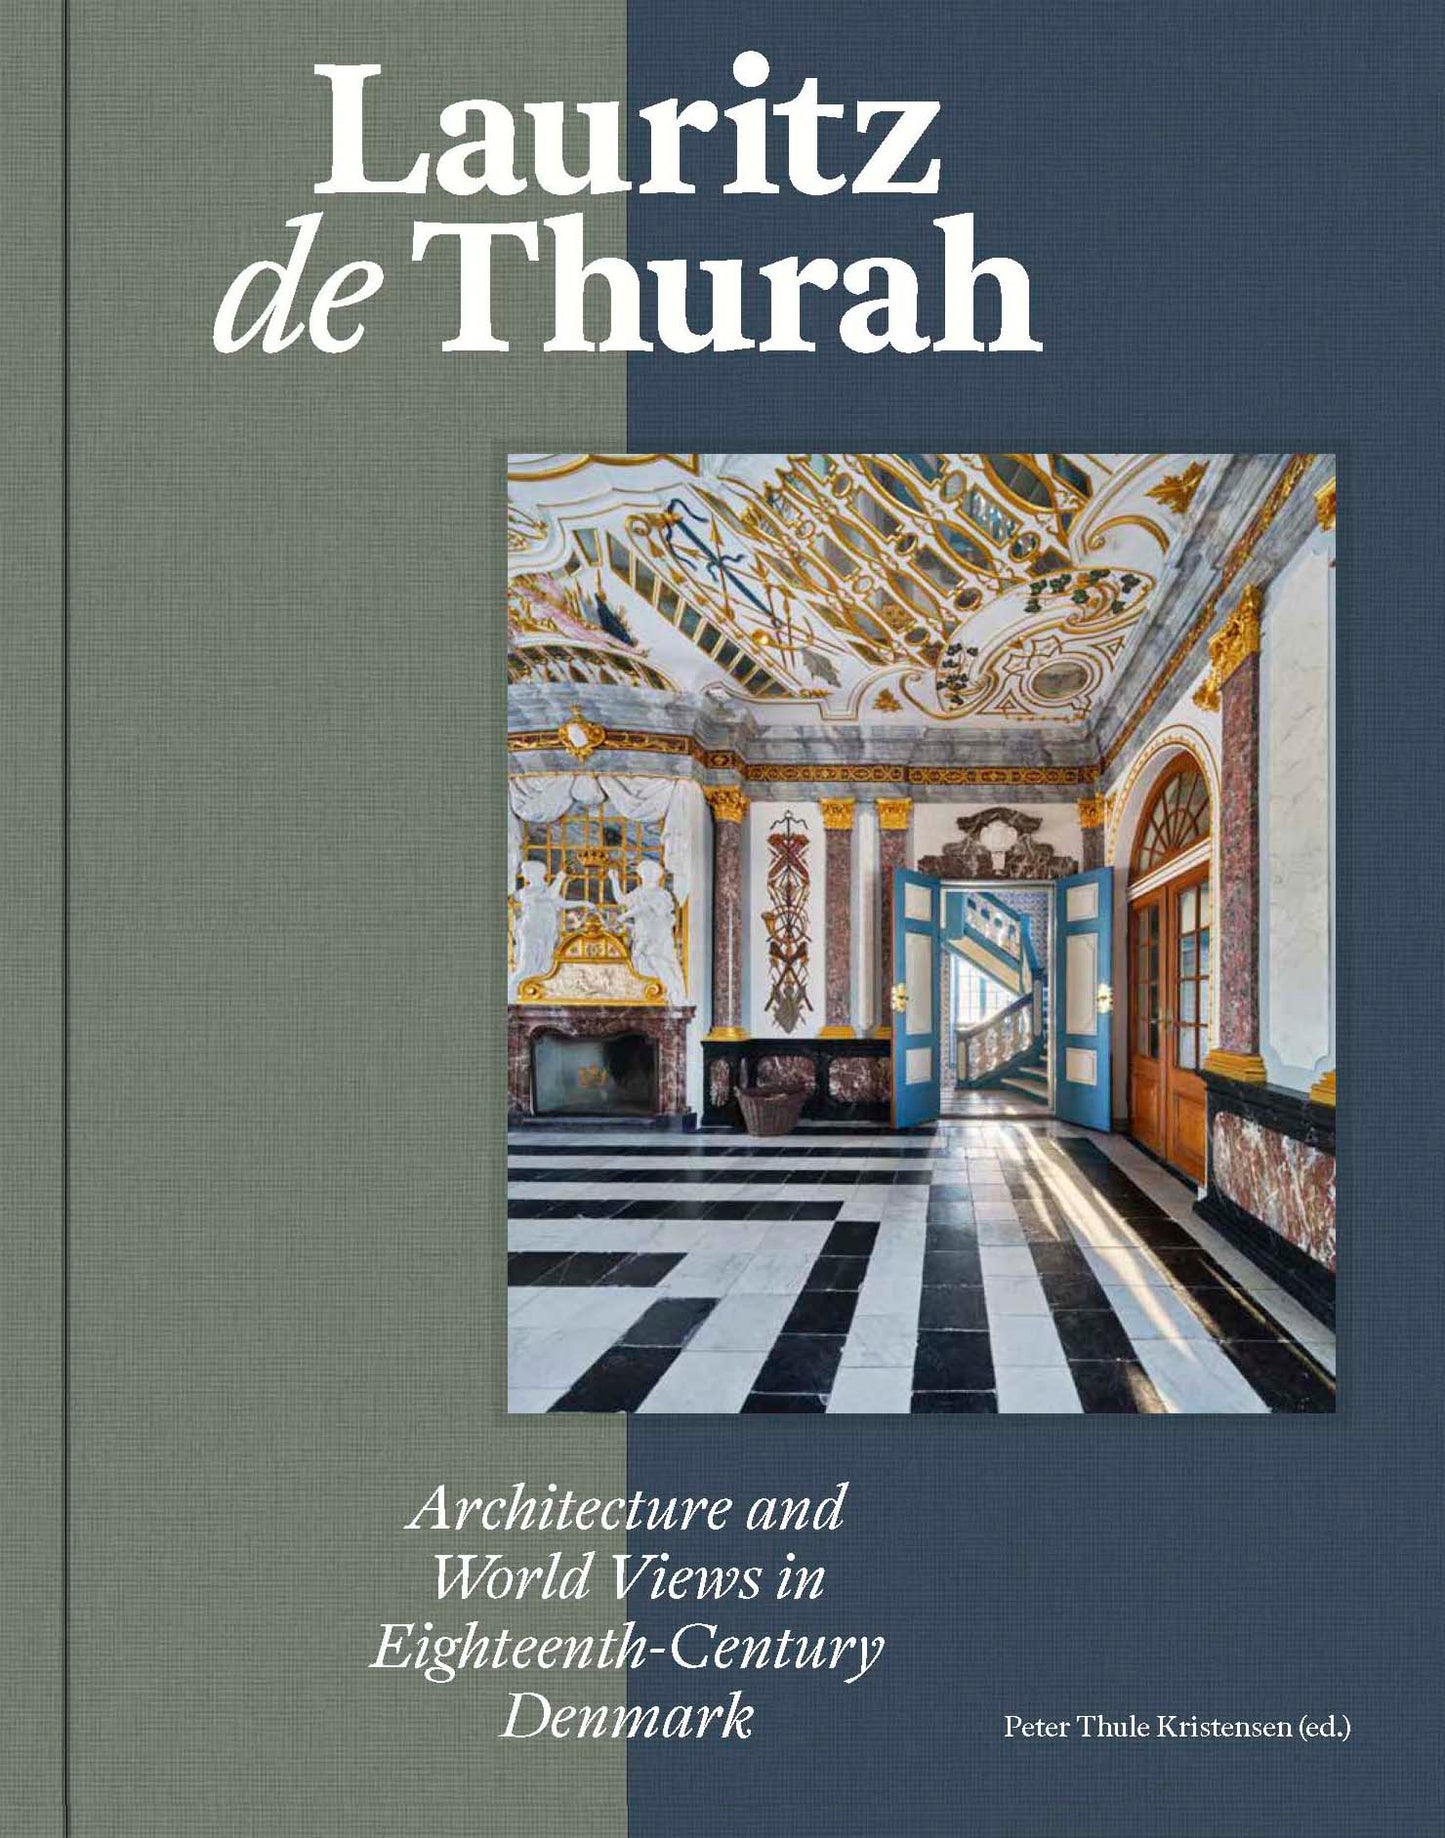 Lauritz de Thurah – Architecture and Worldviews in 18th Century Denmark